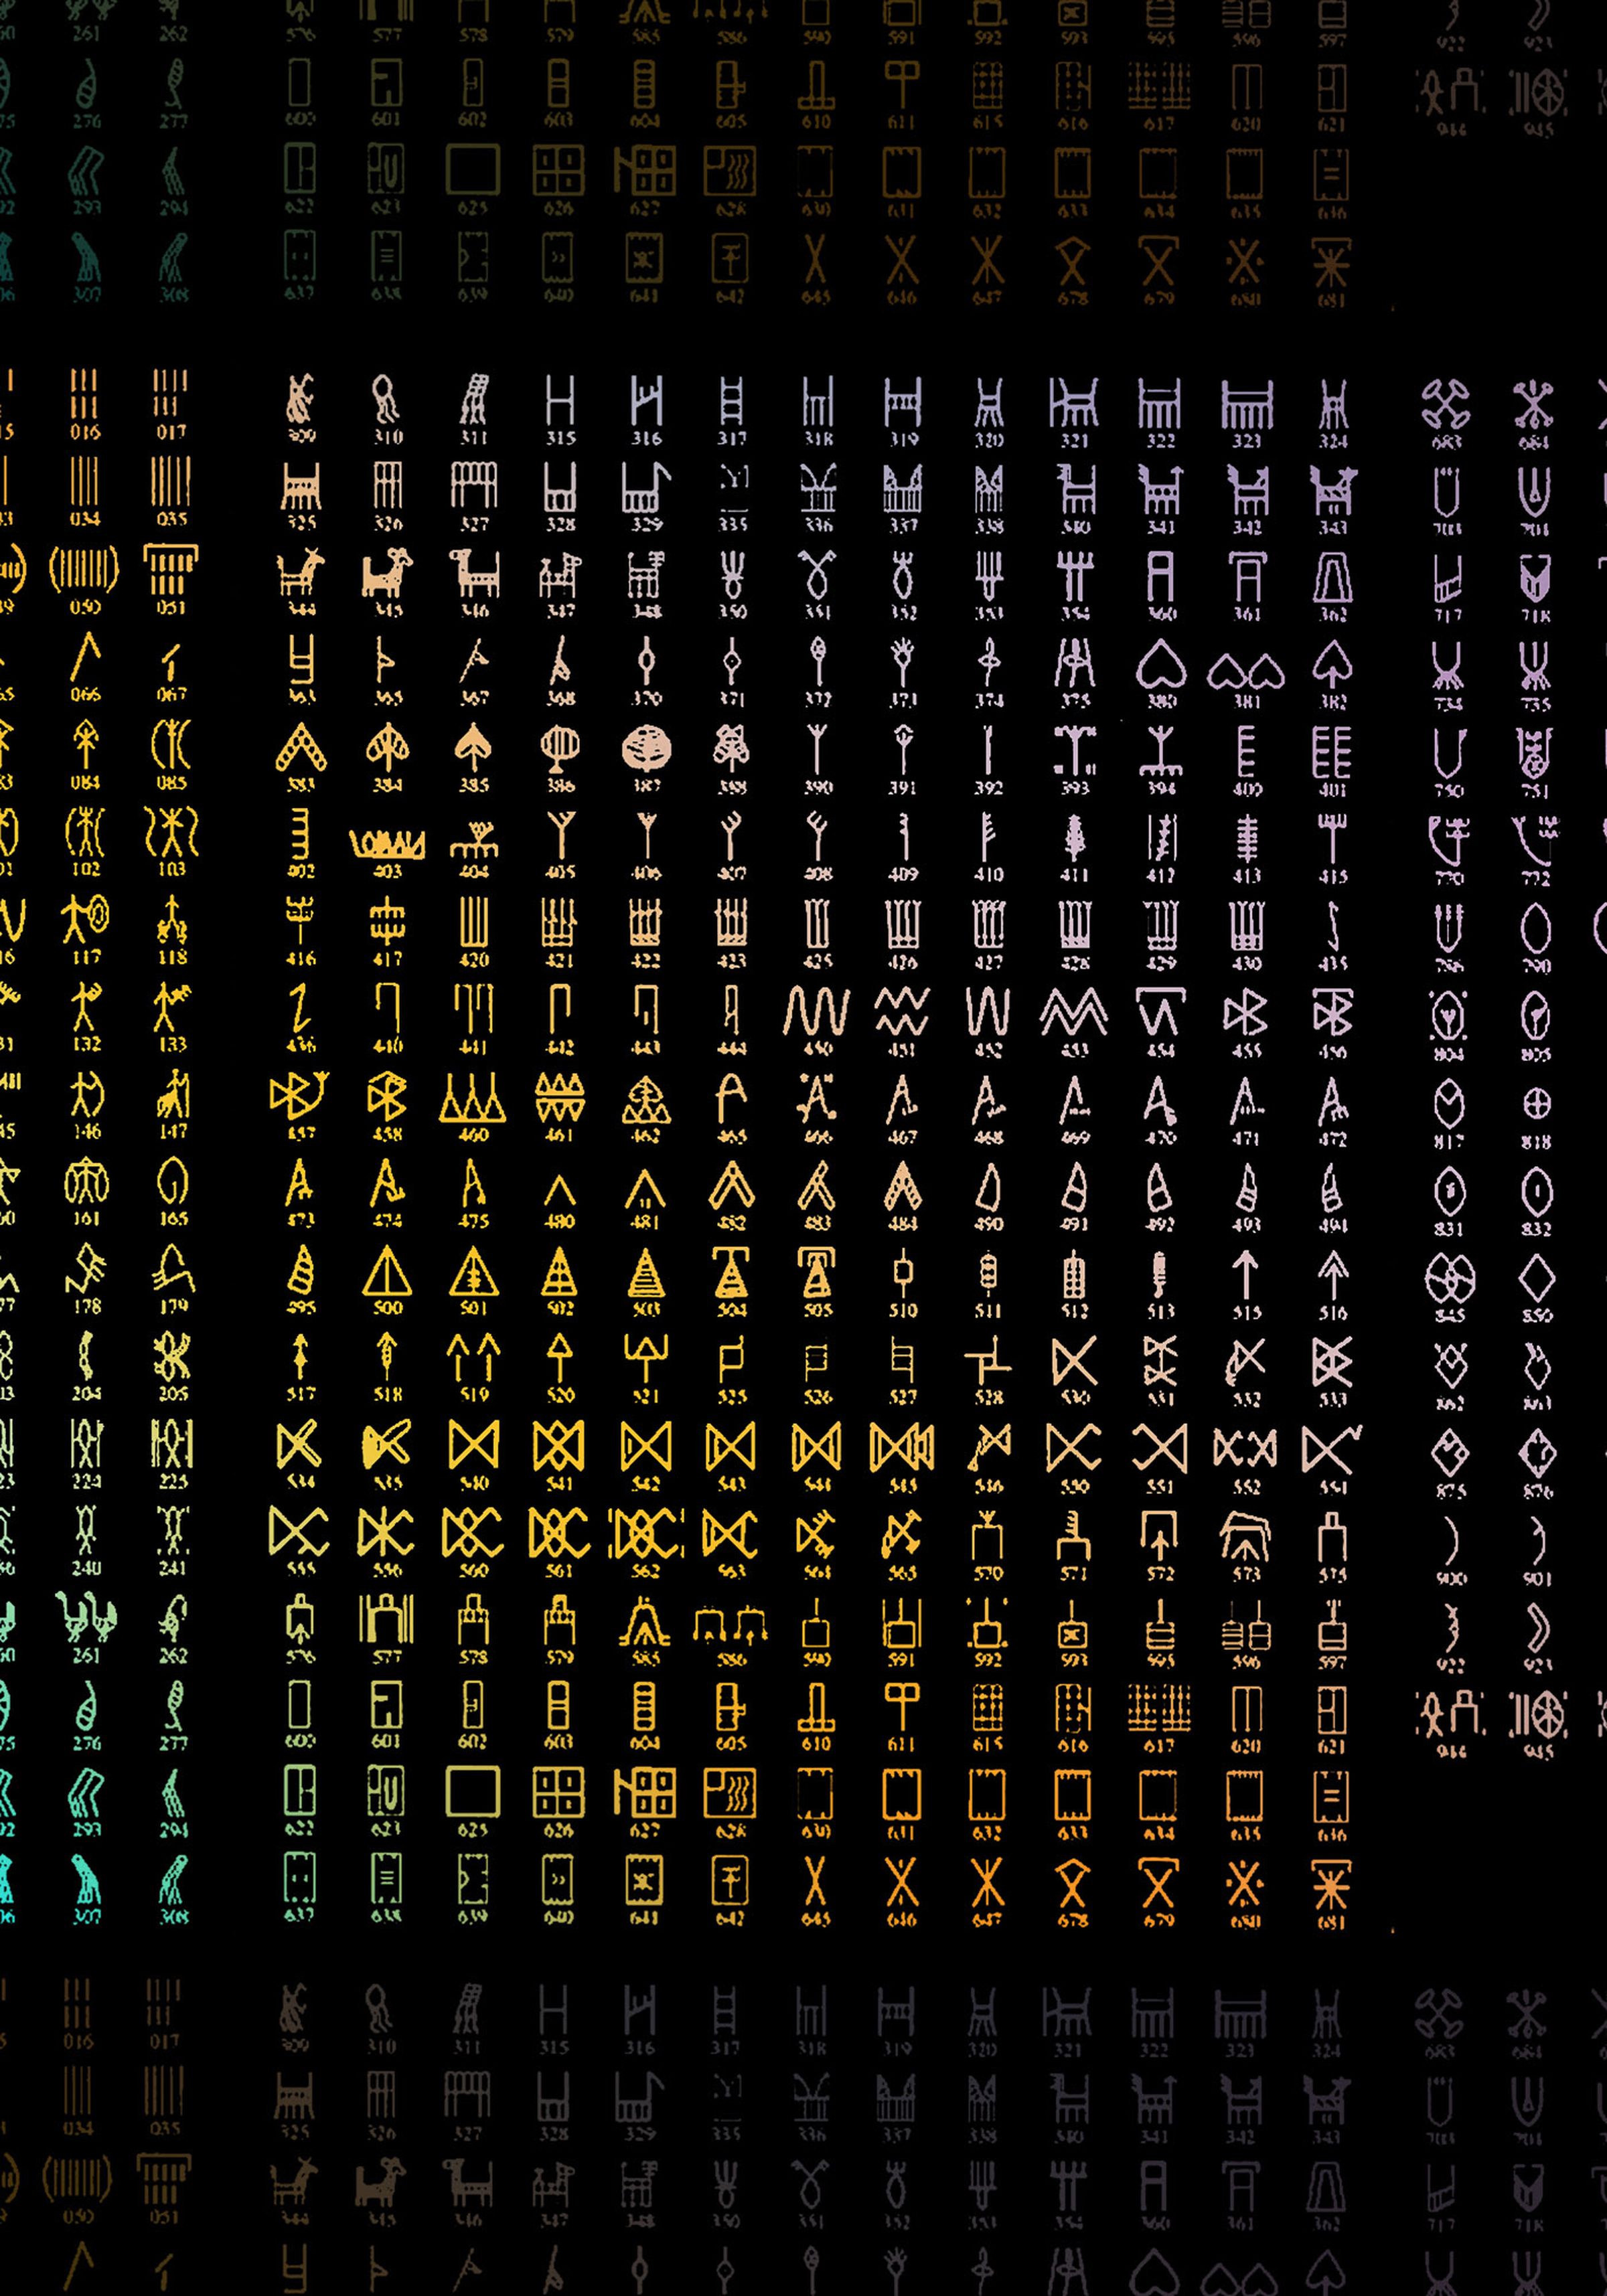 A collection of all known Indus symbols